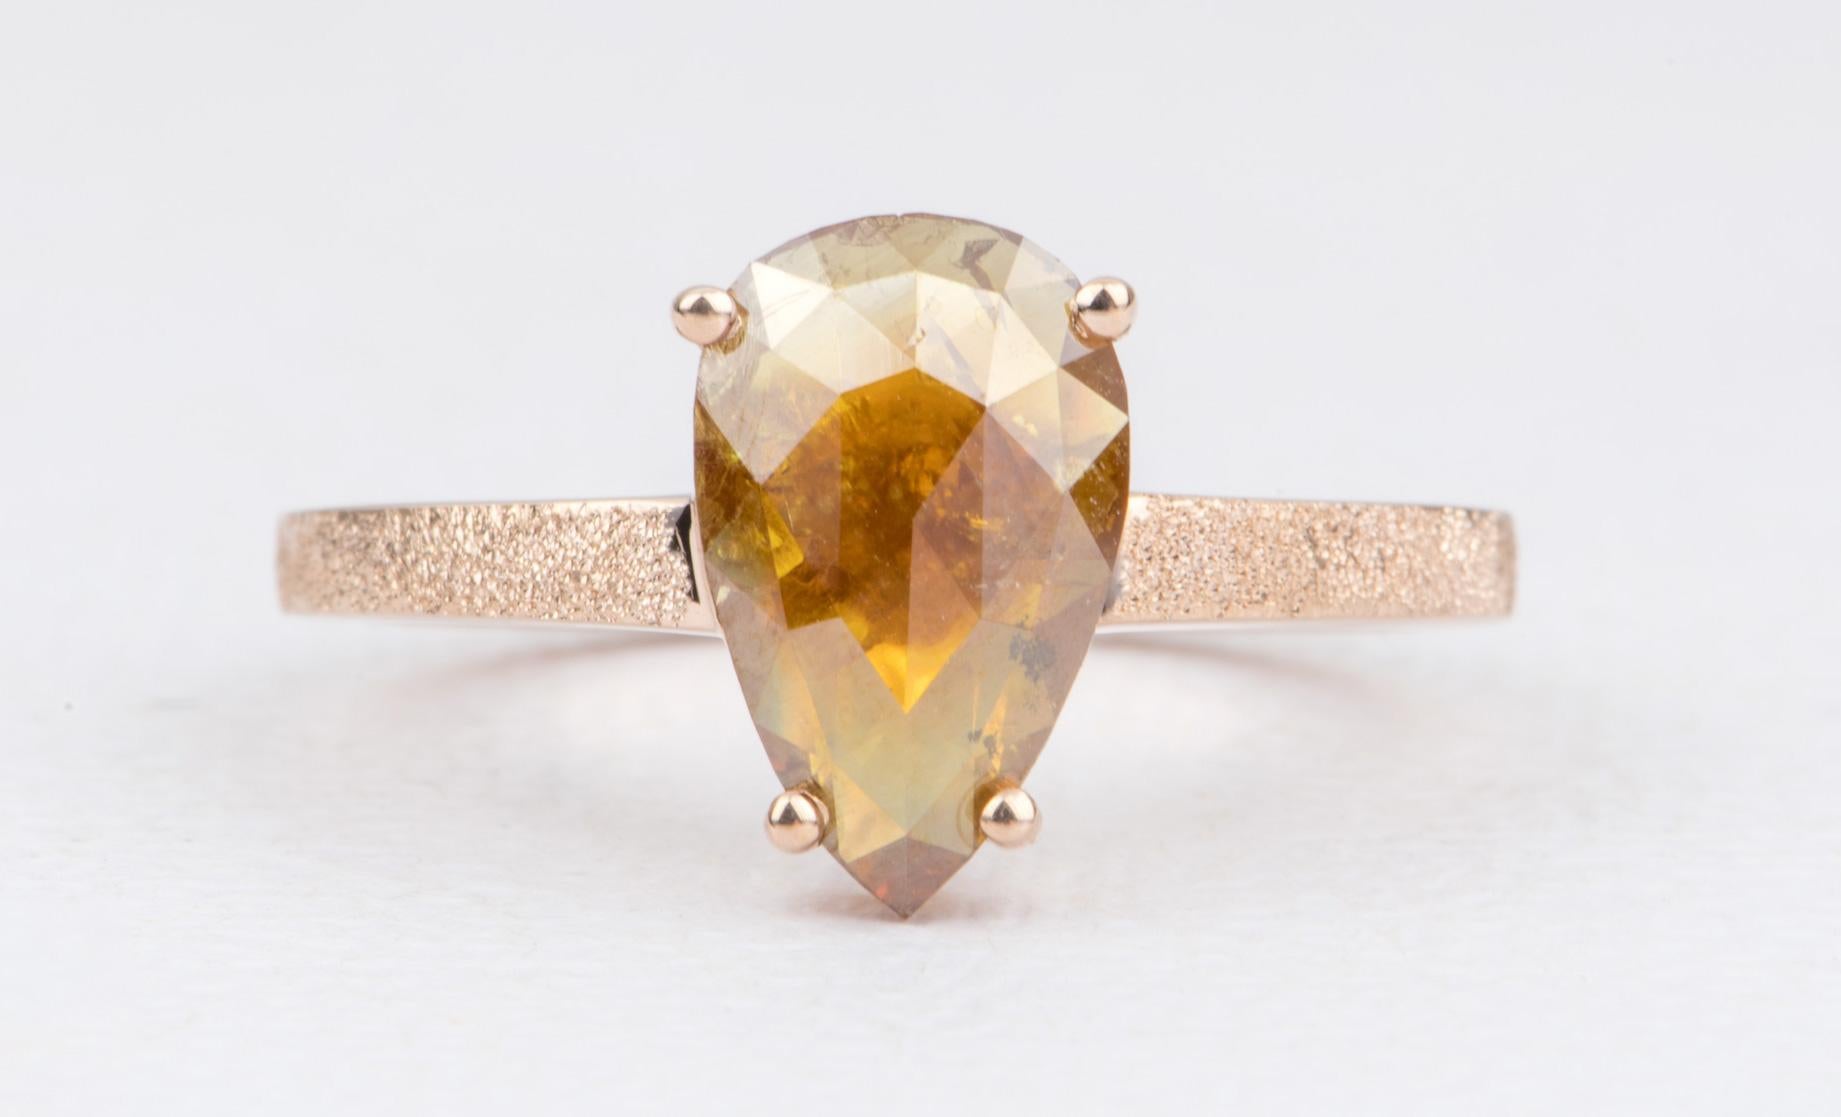 ♥  A stunning pear-shaped golden brown diamond is set on a solid14k rose gold setting
♥  The shank has an all-over heavy sandblast glitter texture, which makes the gold literally sparkle! It complements the rustic nature of the center stone